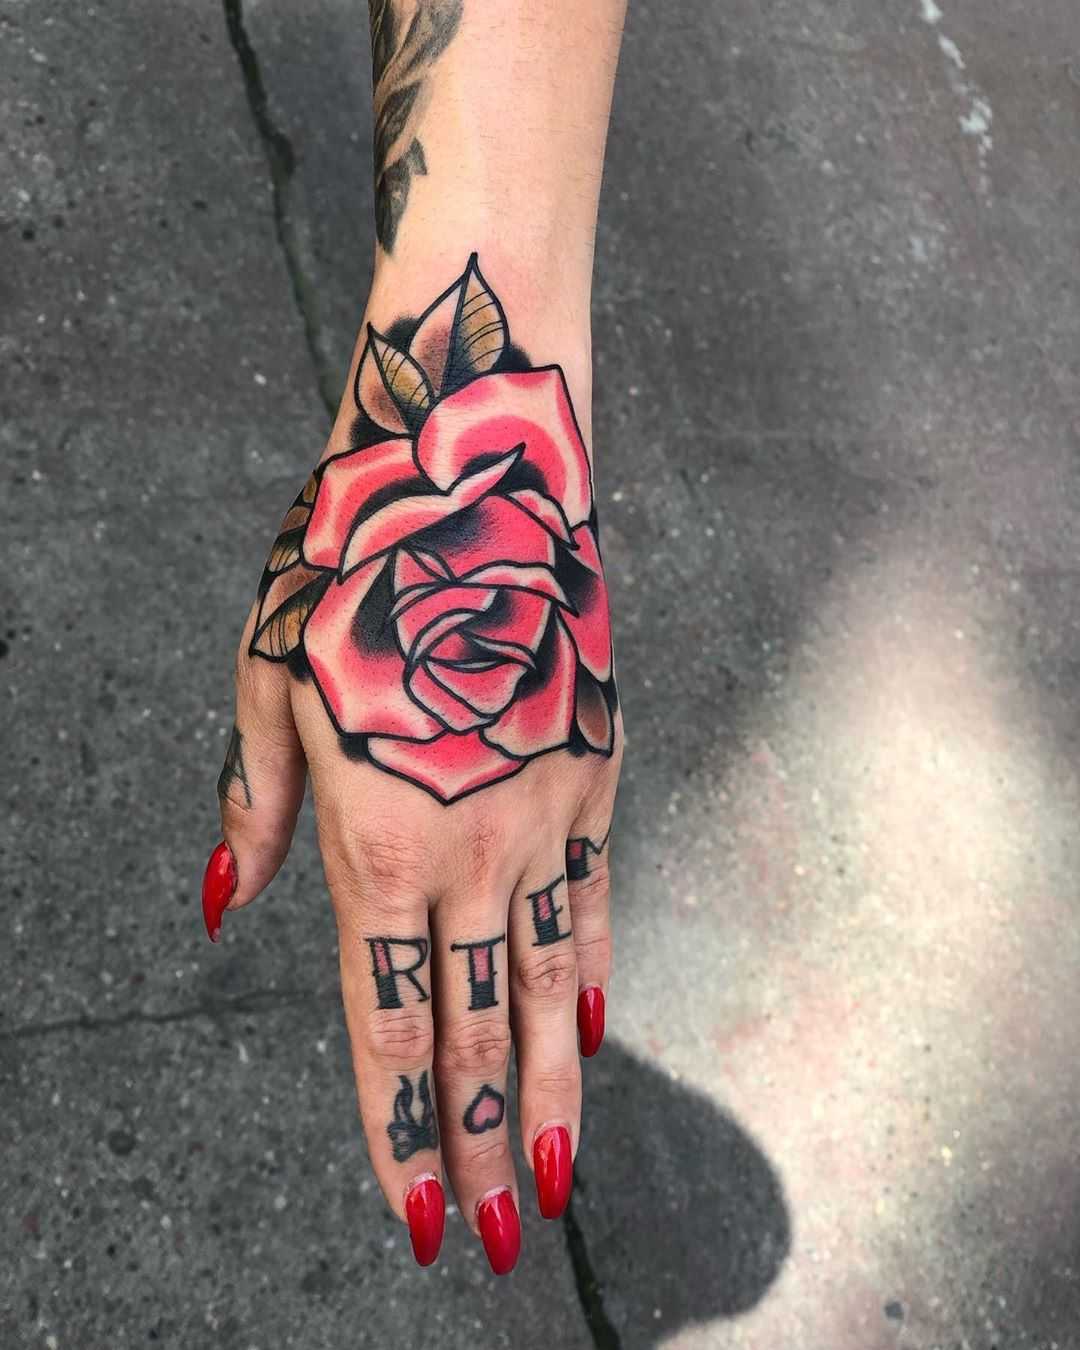 Traditional pink rose tattoo by Mike Nofuck